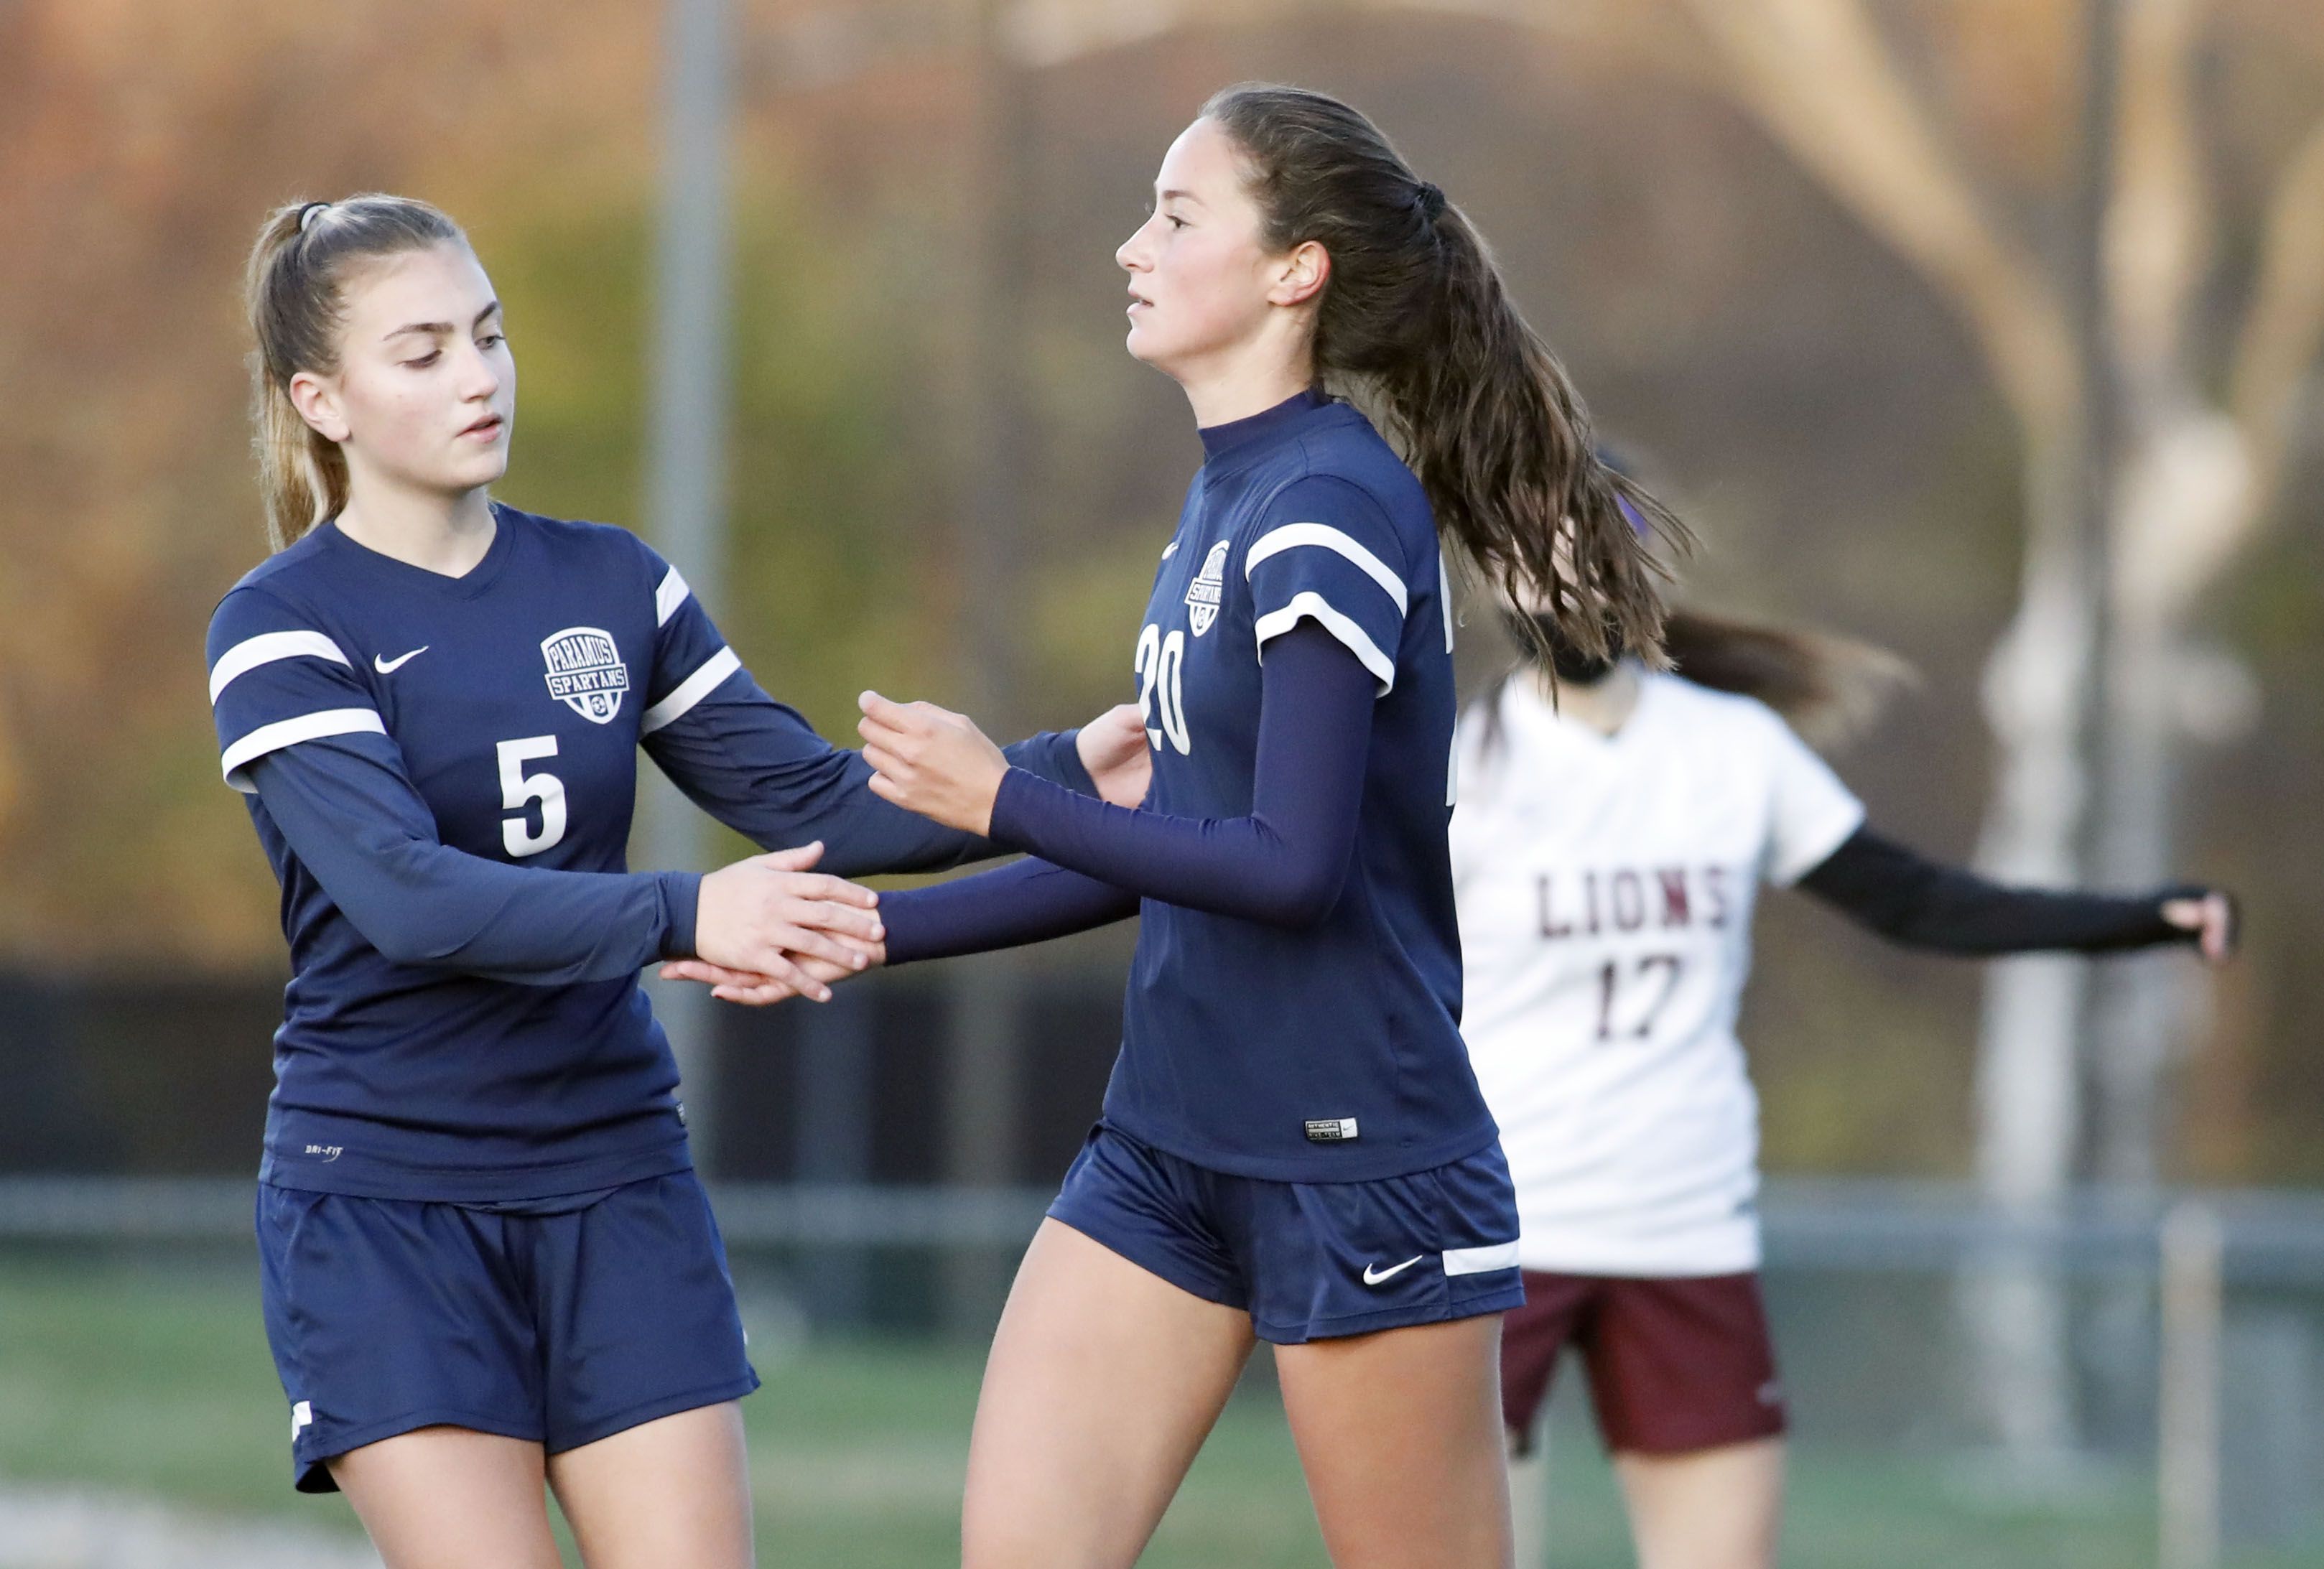 NJ middle school won't play without girl teammates